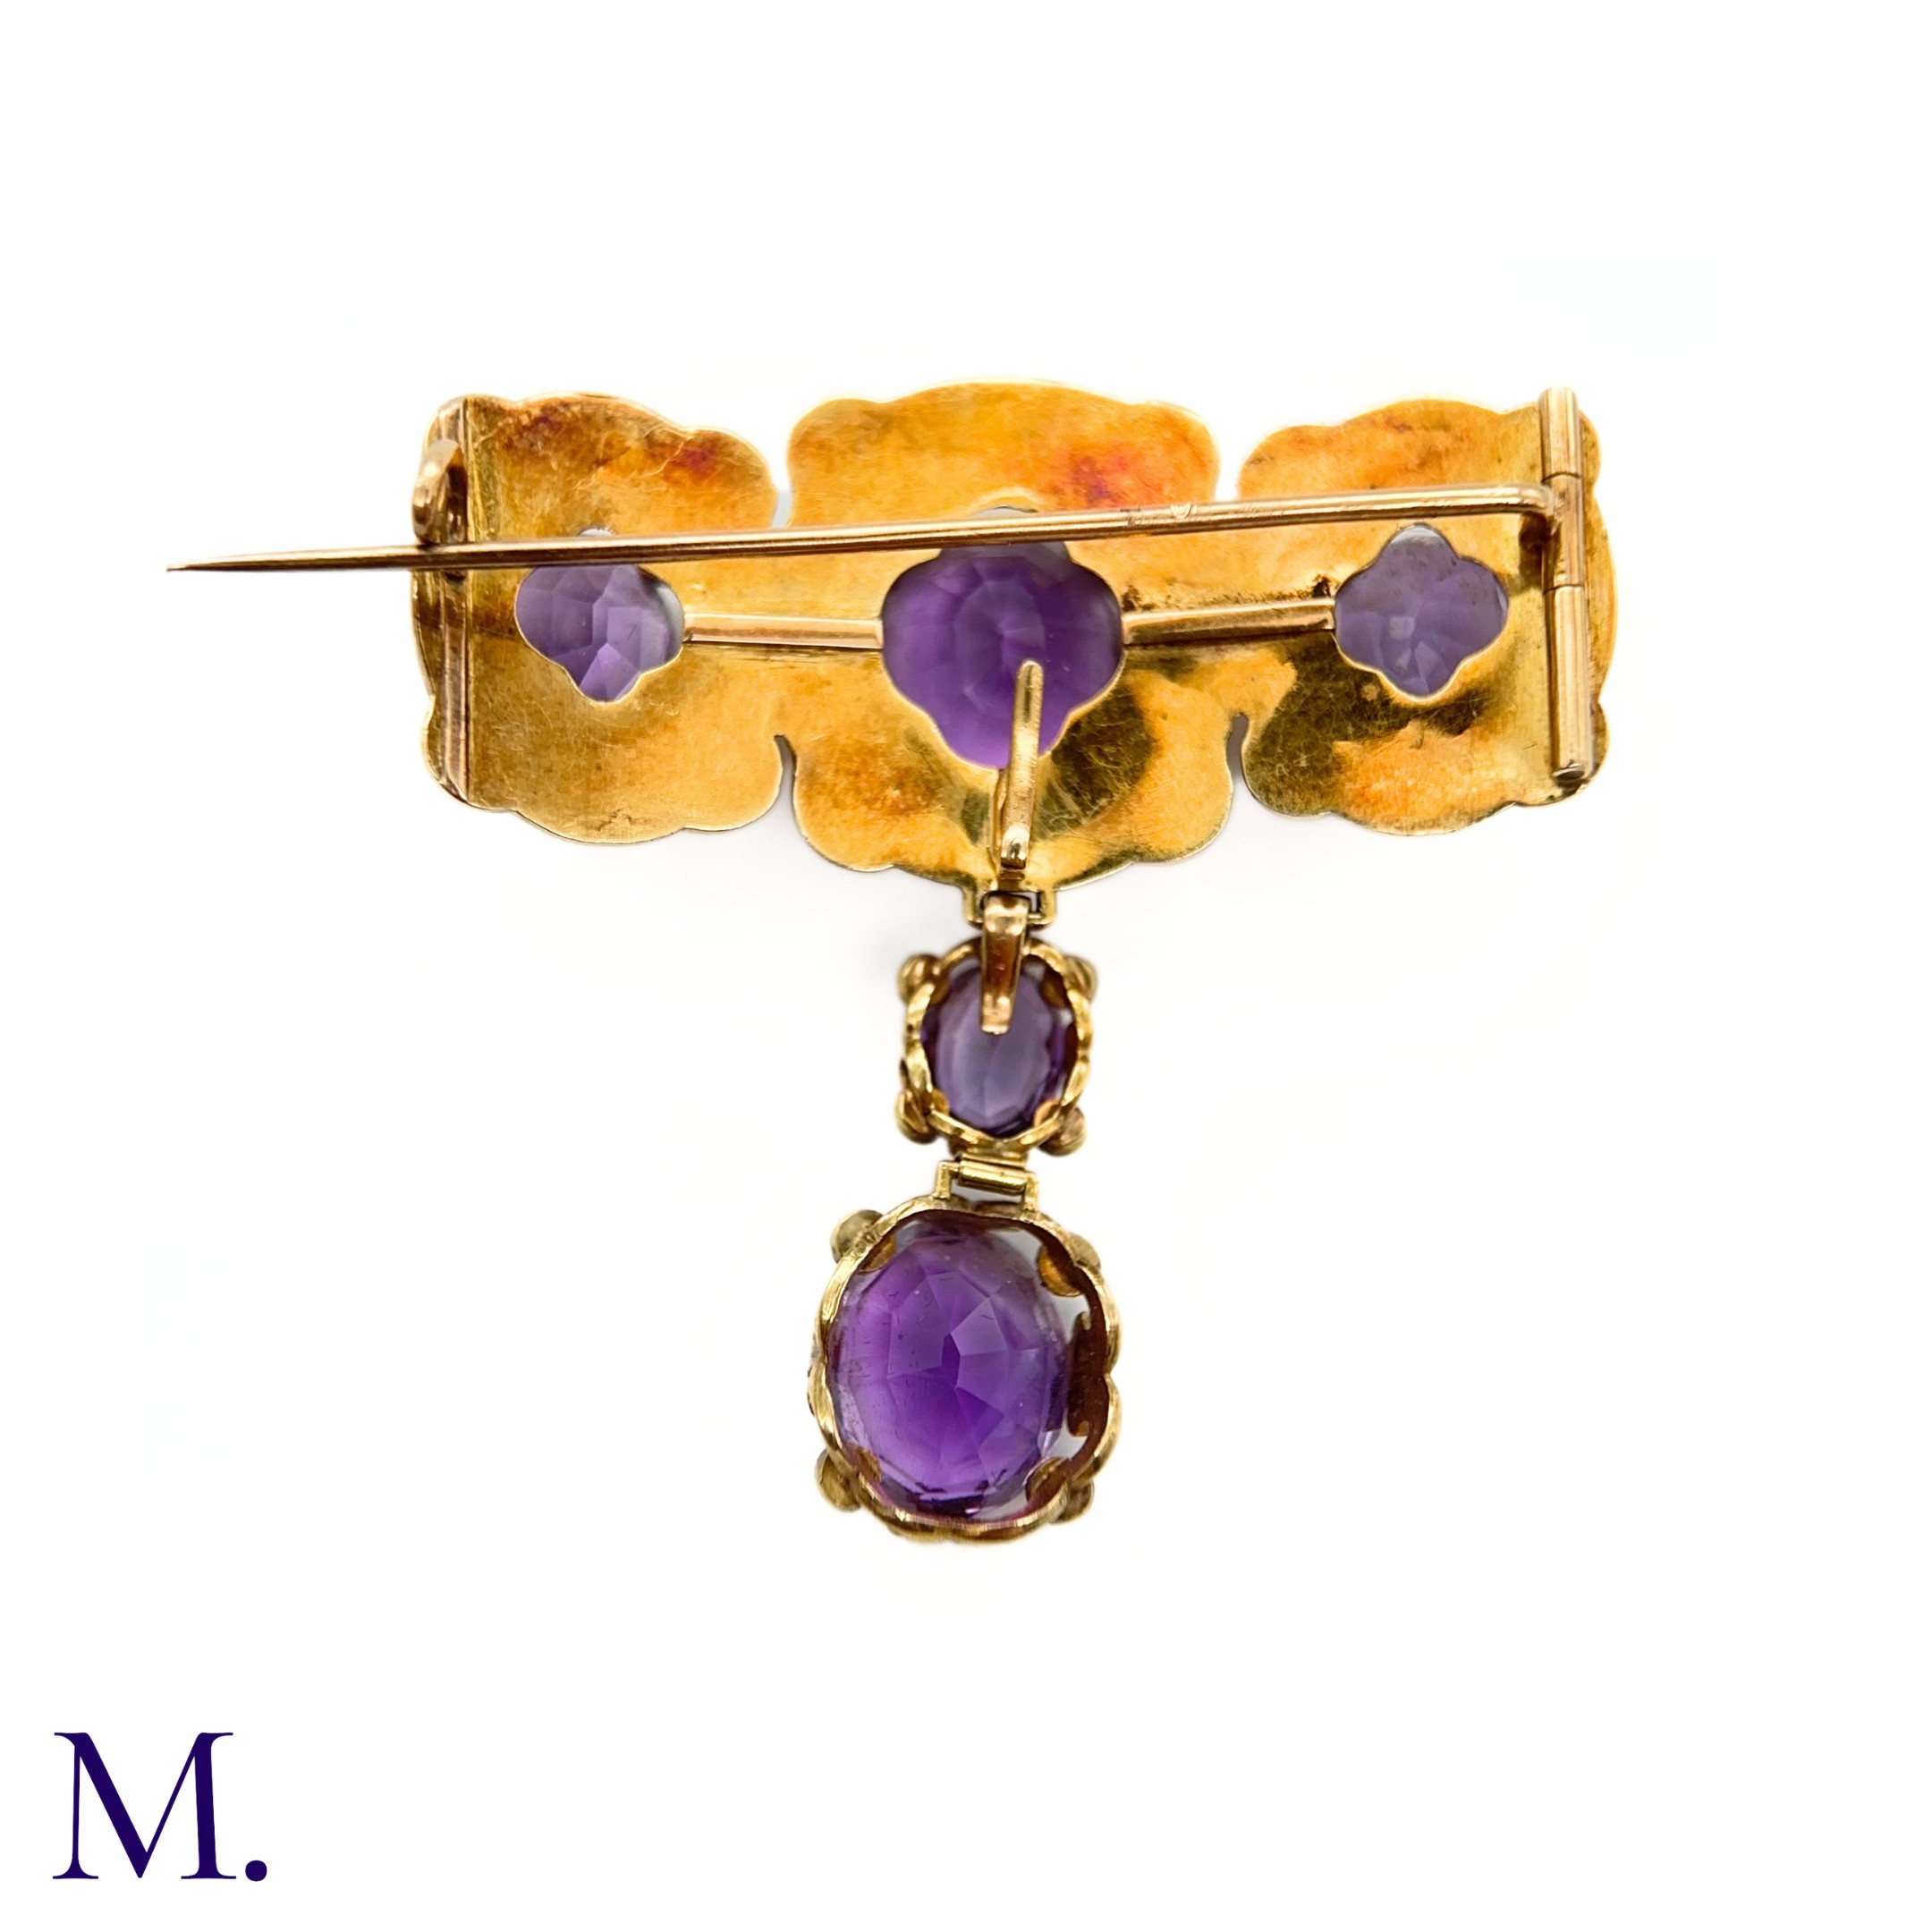 An Antique Amethyst and Pearl Drop Brooch - Image 6 of 6